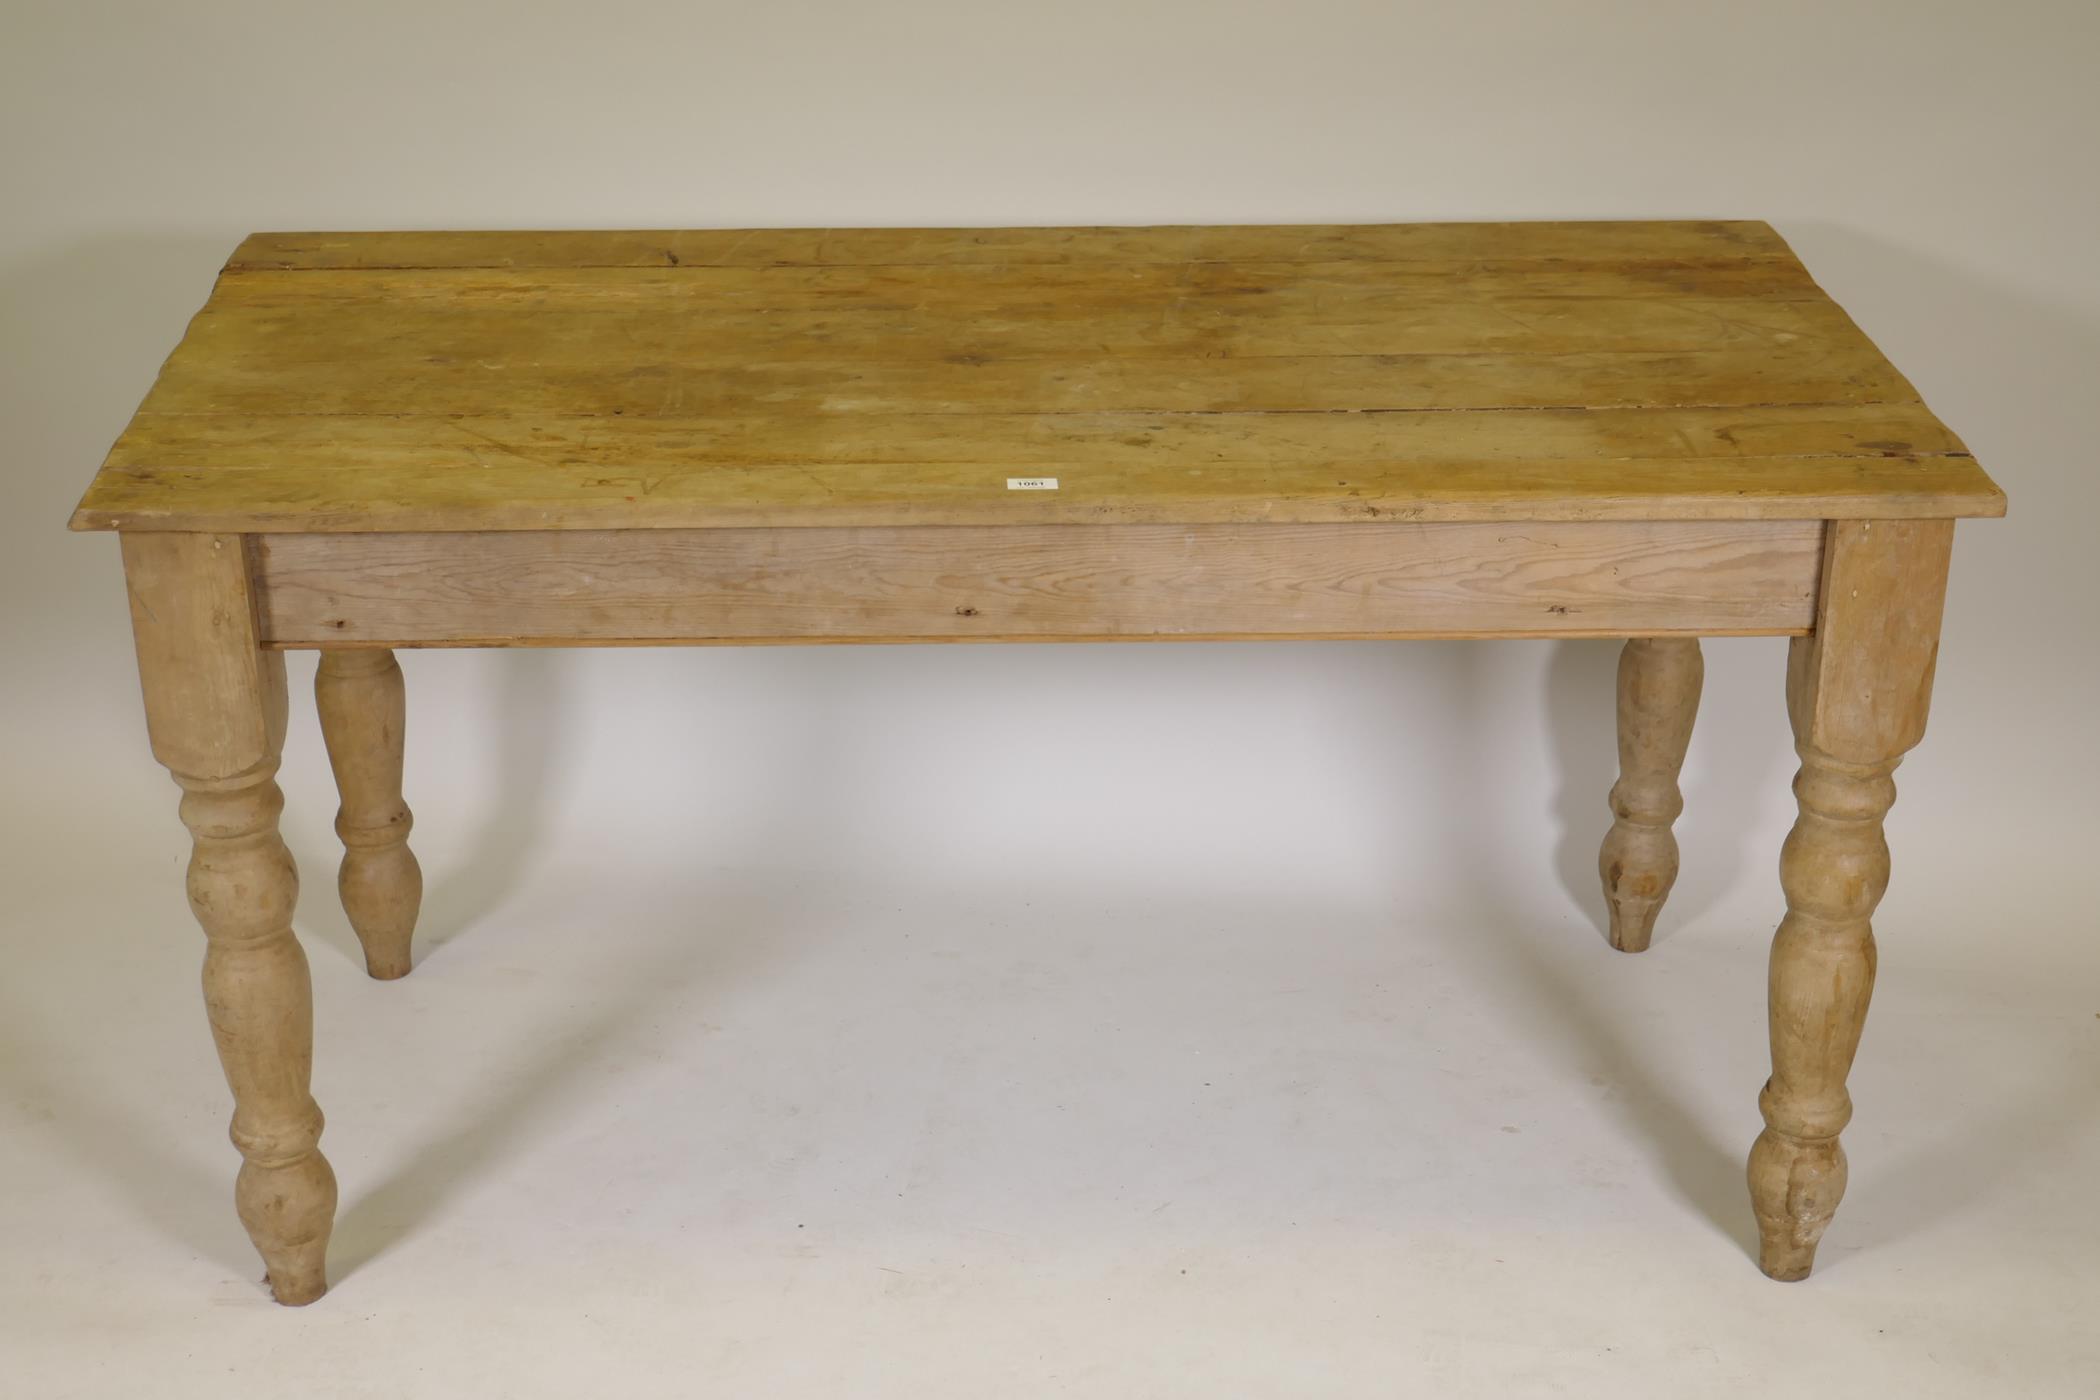 A pine scullery table with planked top, 58" x 30" x 30" - Image 2 of 3